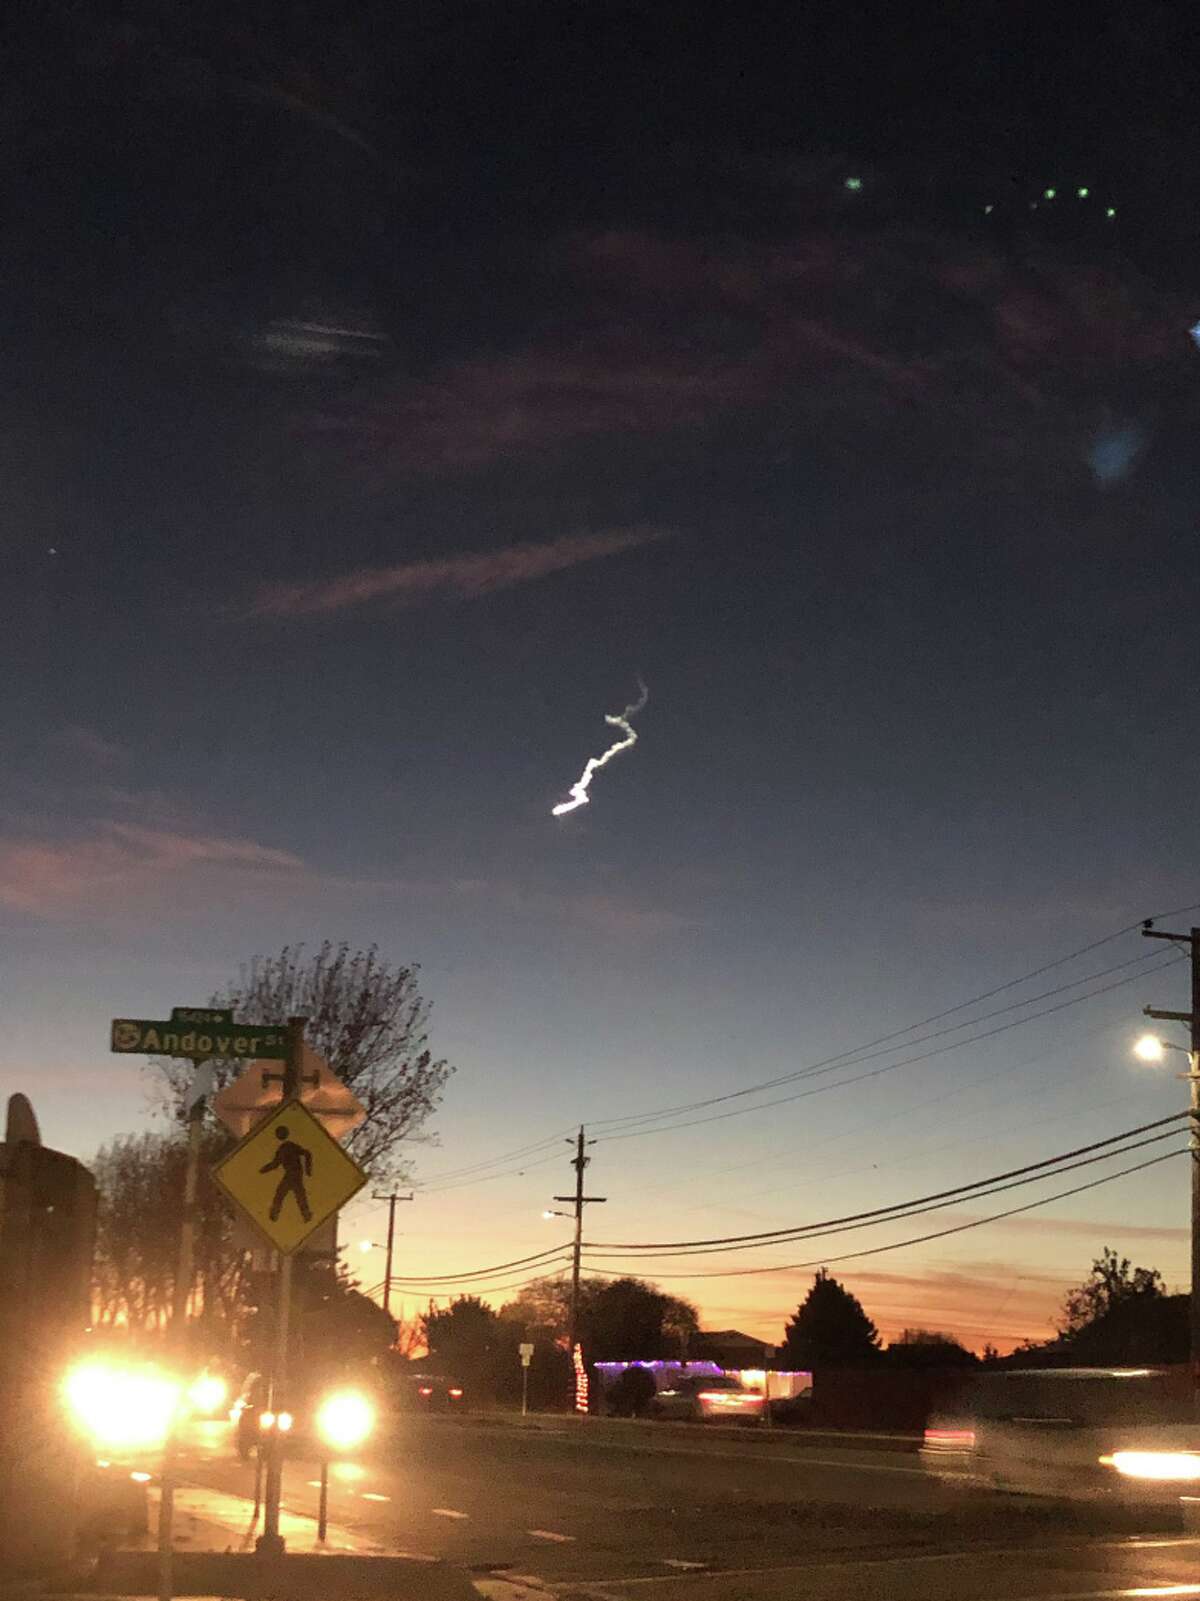 Mysterious light in sky has people wondering what is going on